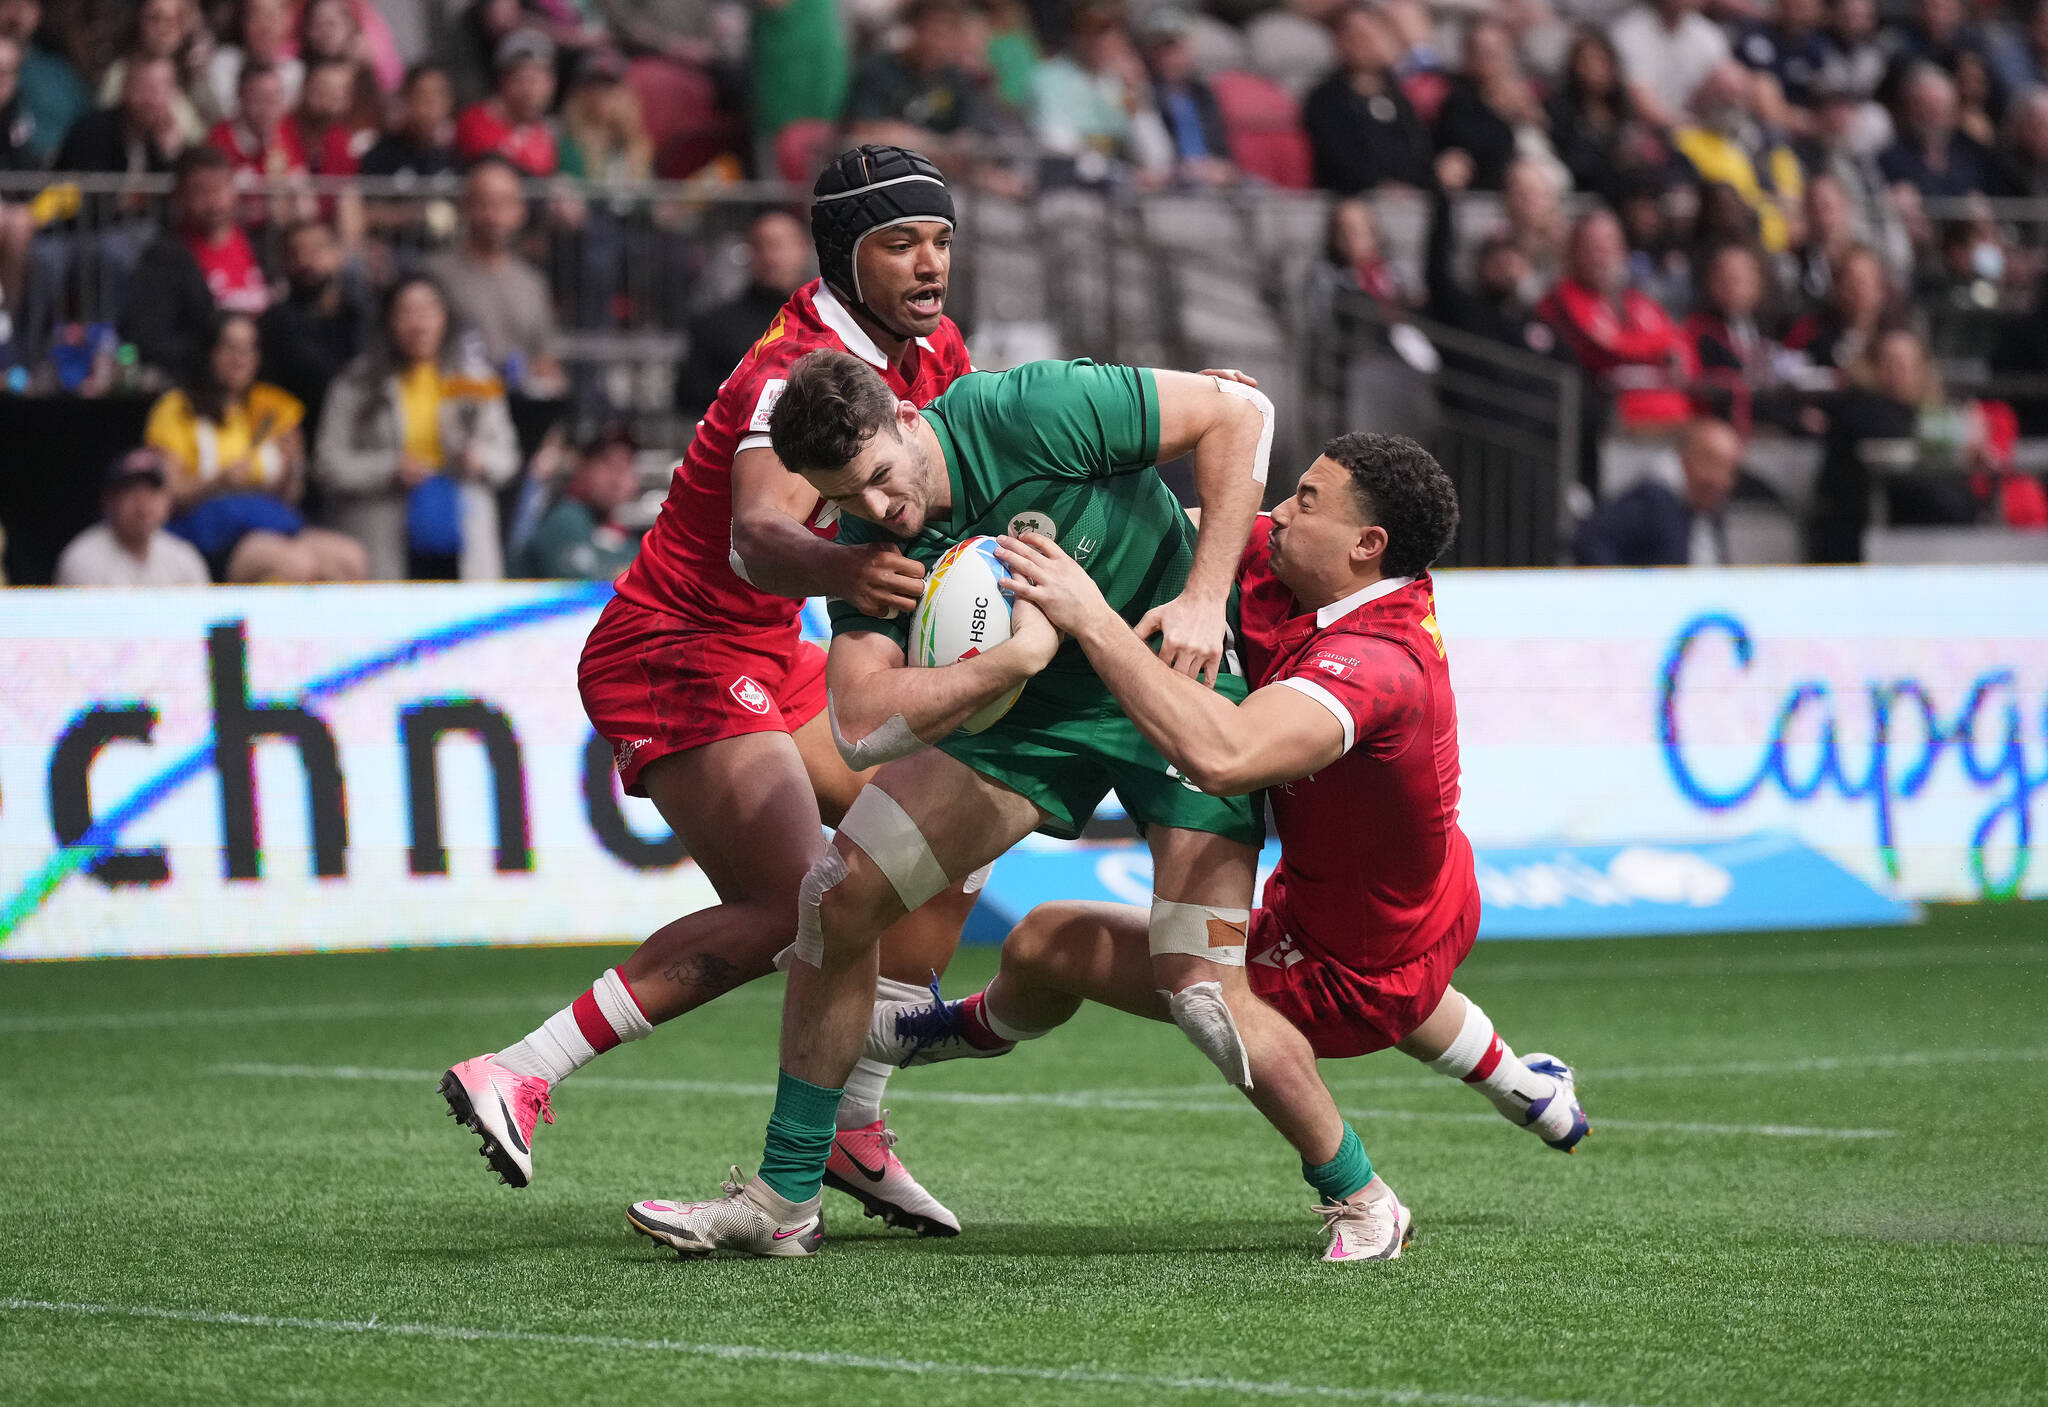 Ireland’s Jack Kelly, centre, fights off Canada’s Anton Ngongo, left, and Elias Ergas, right, to score a try during HSBC Canada Sevens rugby action, in Vancouver, B.C., Sunday, April 17, 2022. THE CANADIAN PRESS/Darryl Dyck